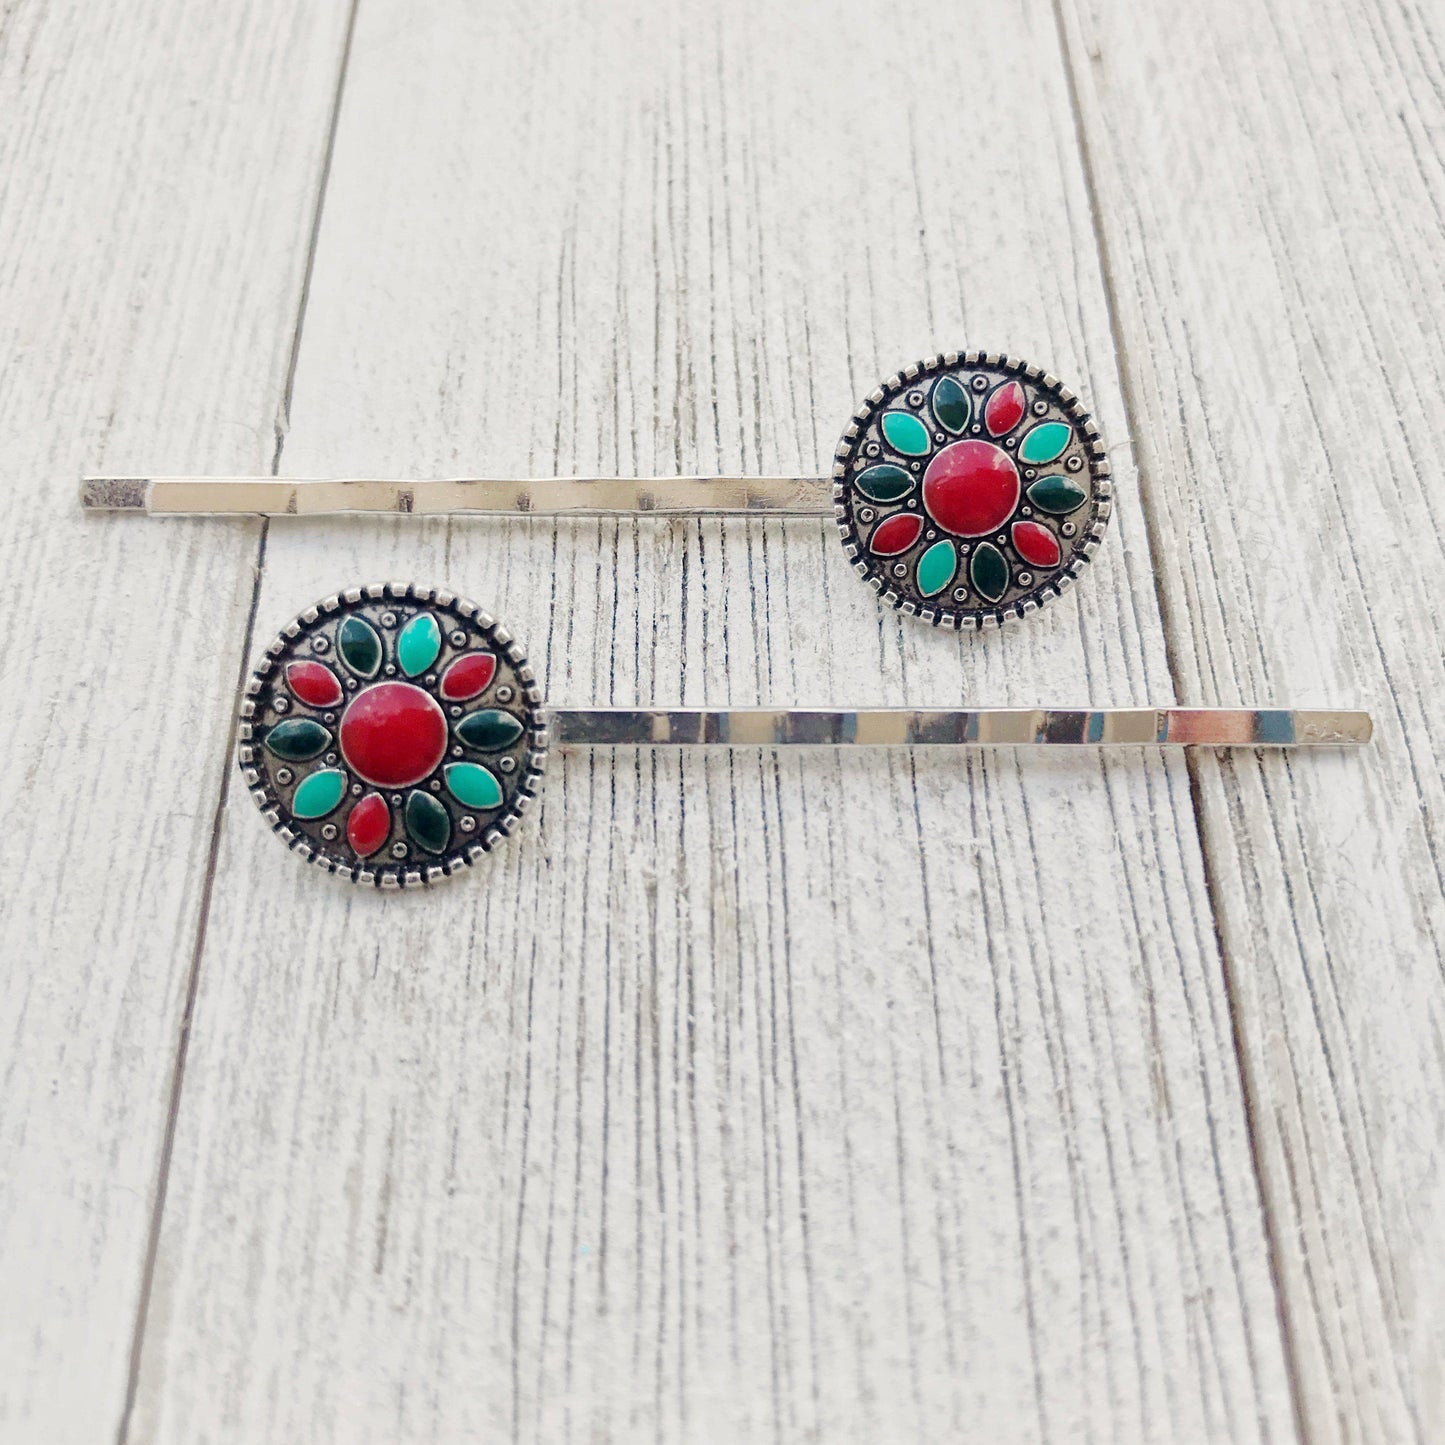 Boho Western Turquoise Medallion Hair Pins - Set of 2 Stylish Accessories